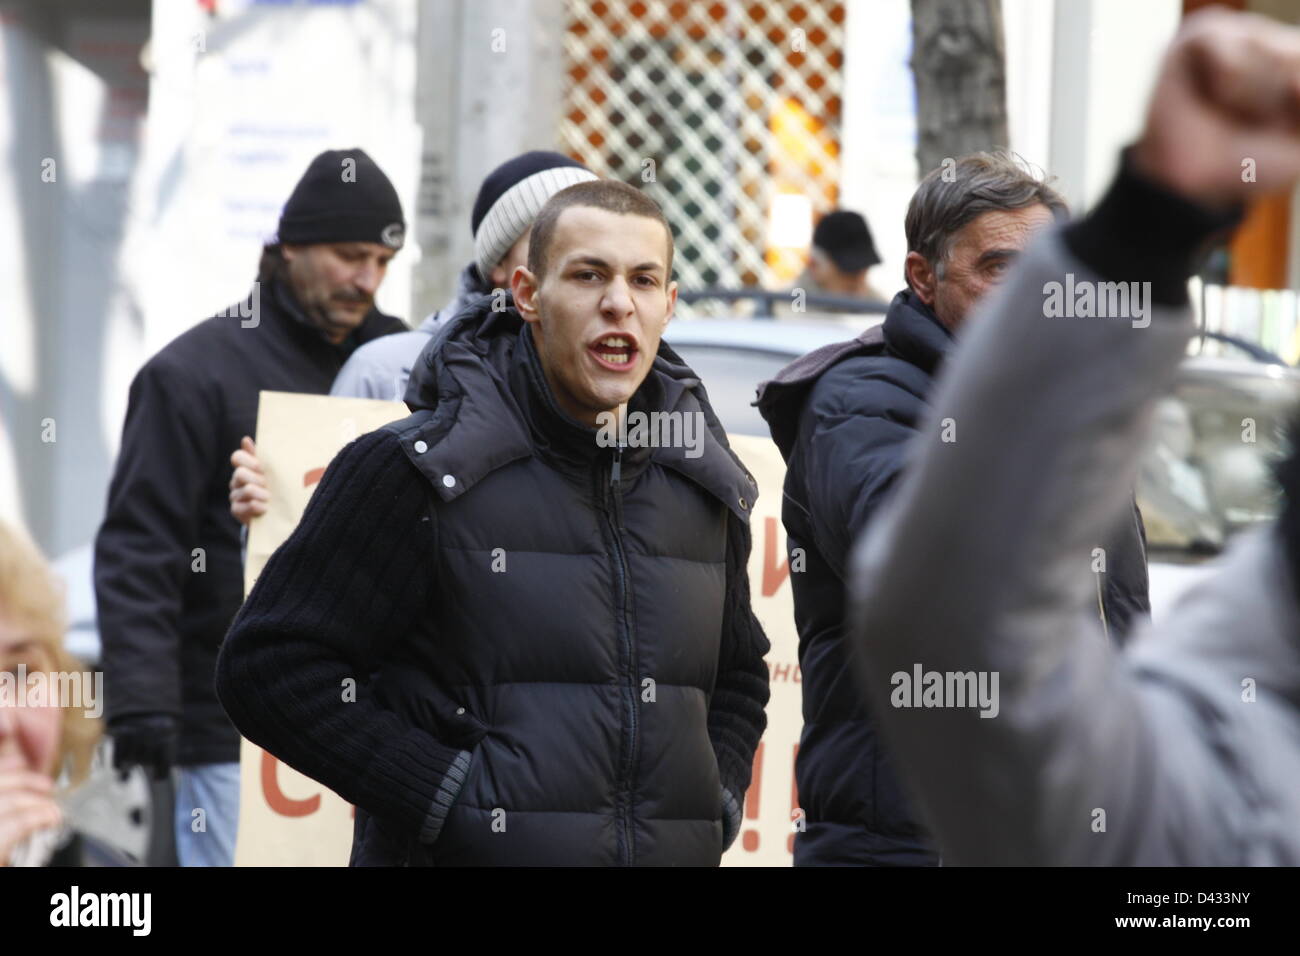 Sofia, Bulgaria; 03/03/2012. Demonstrators shouting 'Mafia, Mafia' in protest of corruption and nepotism in the country. Stock Photo